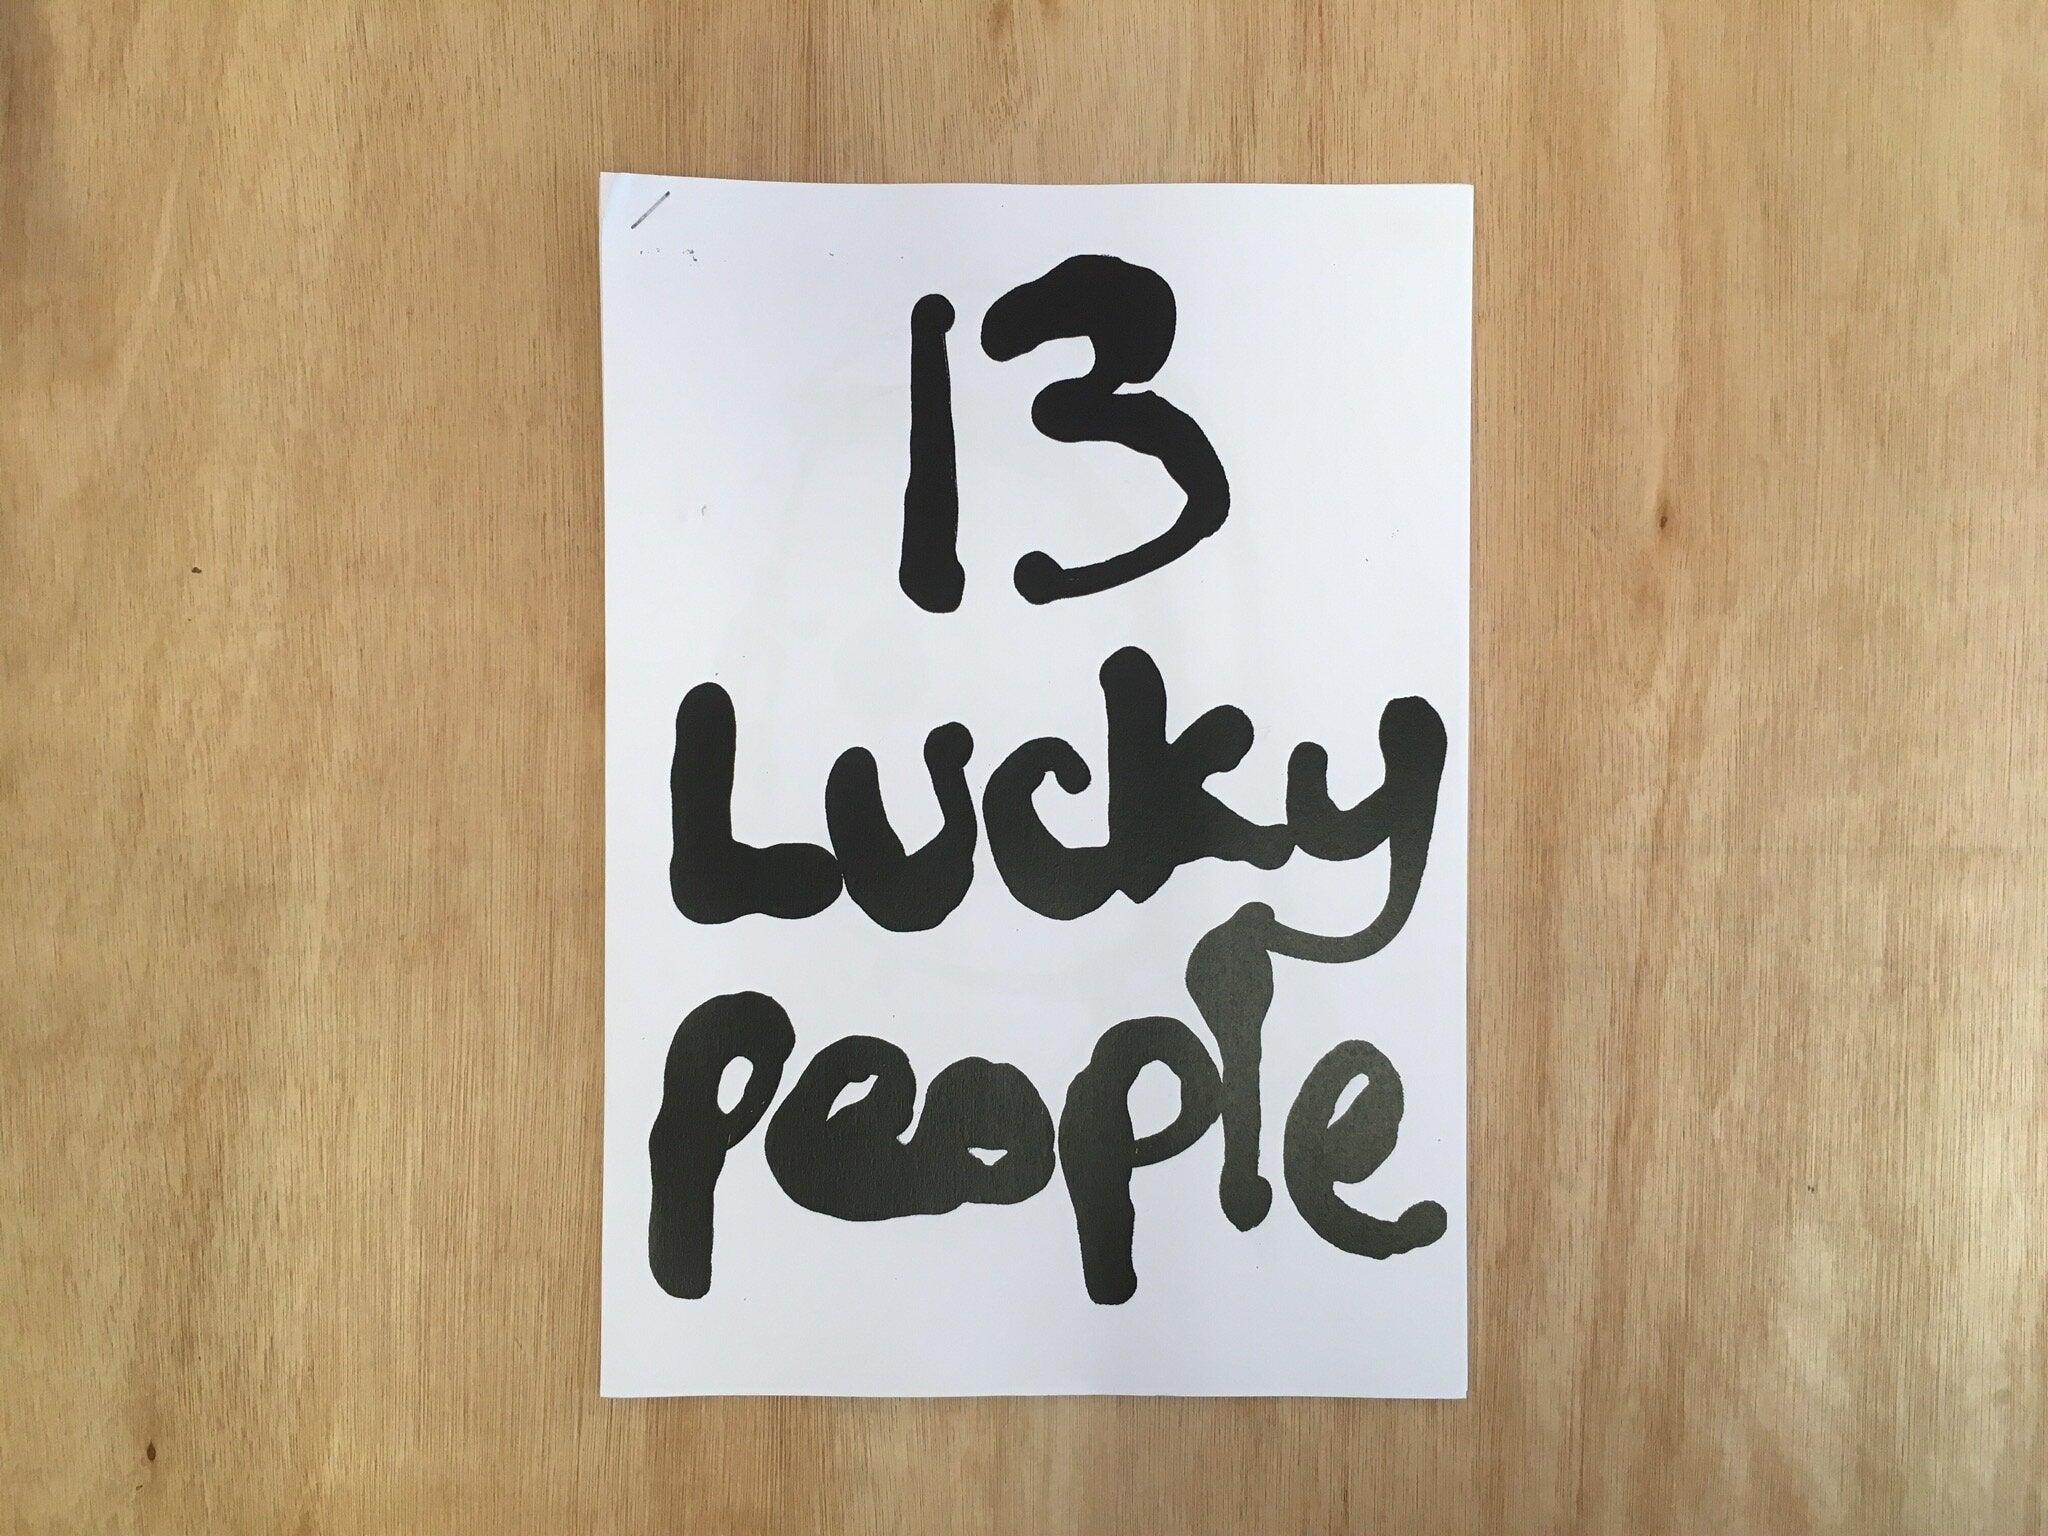 13 LUCKY PEOPLE by Owen Piper